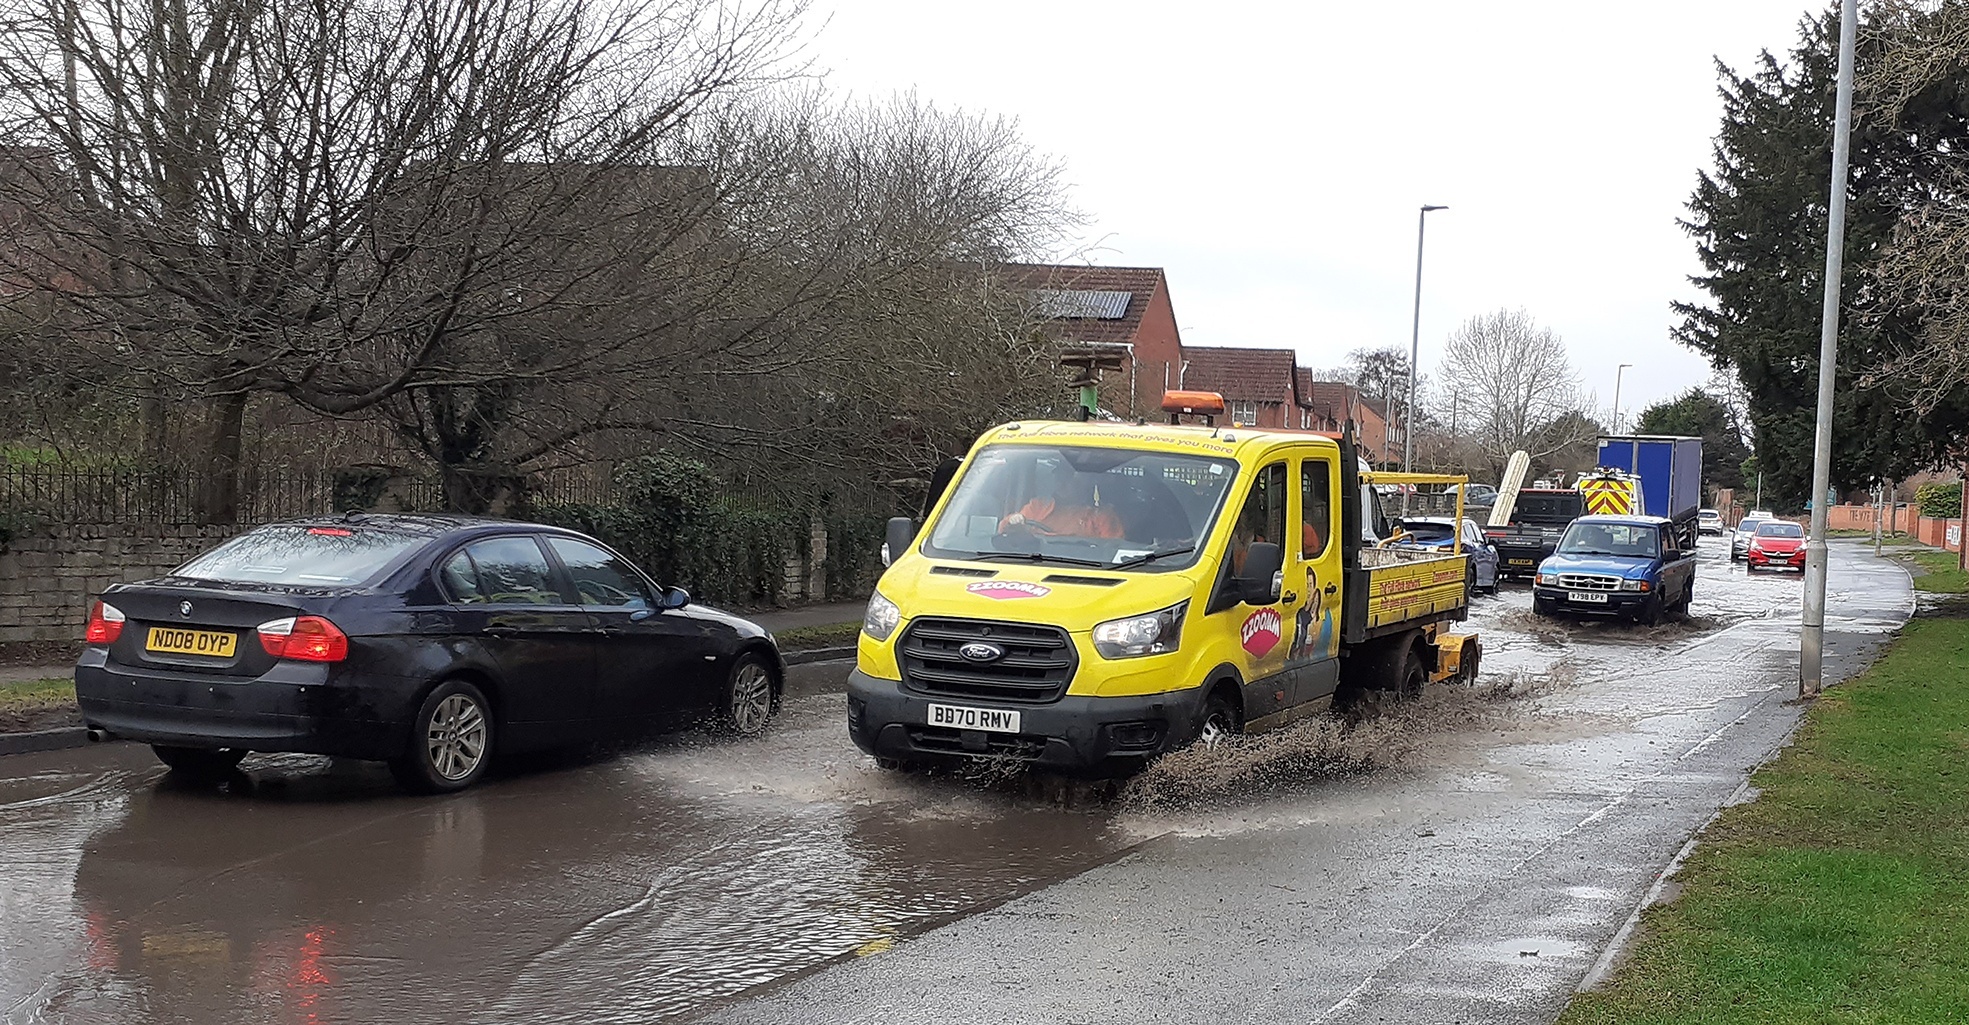 Vehicles on a flooded Holme Lacy Road